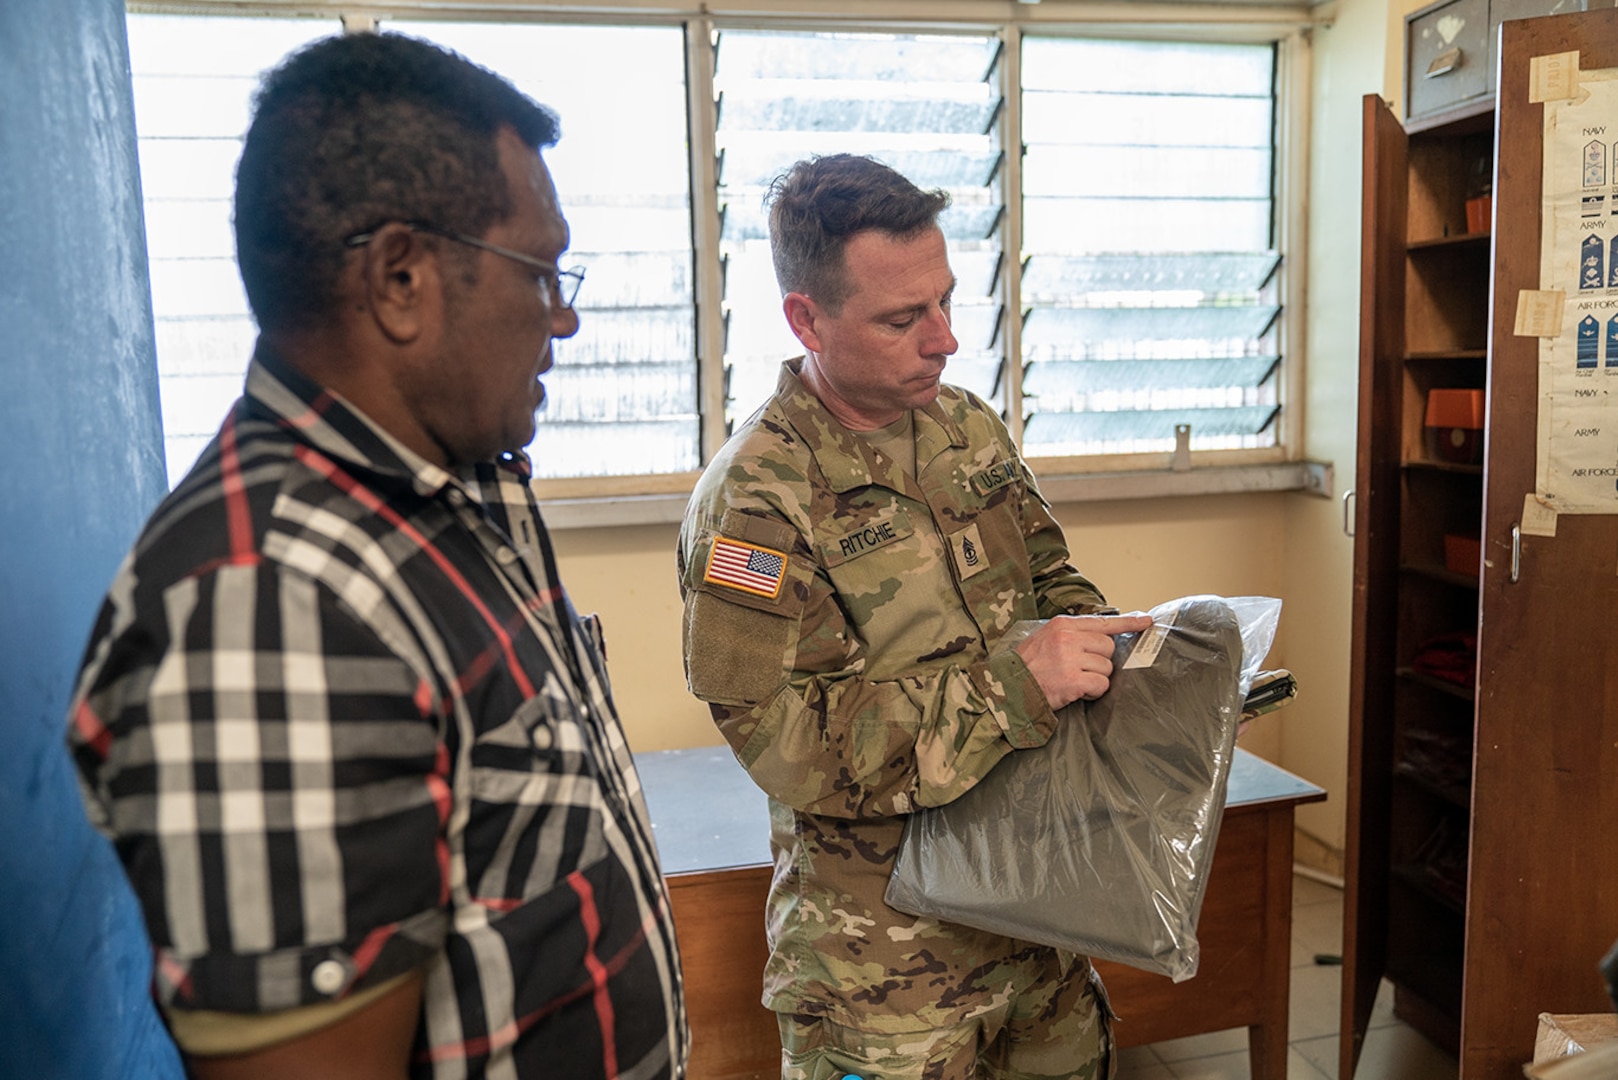 First Sgt. Aaron Ritchie, right, 64th Troop Command’s senior supply sergeant and sustainment noncommissioned officer (NCO) representative, asks a Papua New Guinea Defence Force Soldier about serial numbers for supply items March 24, 2023, at Murray Barracks in Port Moresby, Papua New Guinea. Six NCOs conducted an information exchange with Papua New Guinea Defence Force counterparts March 20-27 as part of the State Partnership Program.